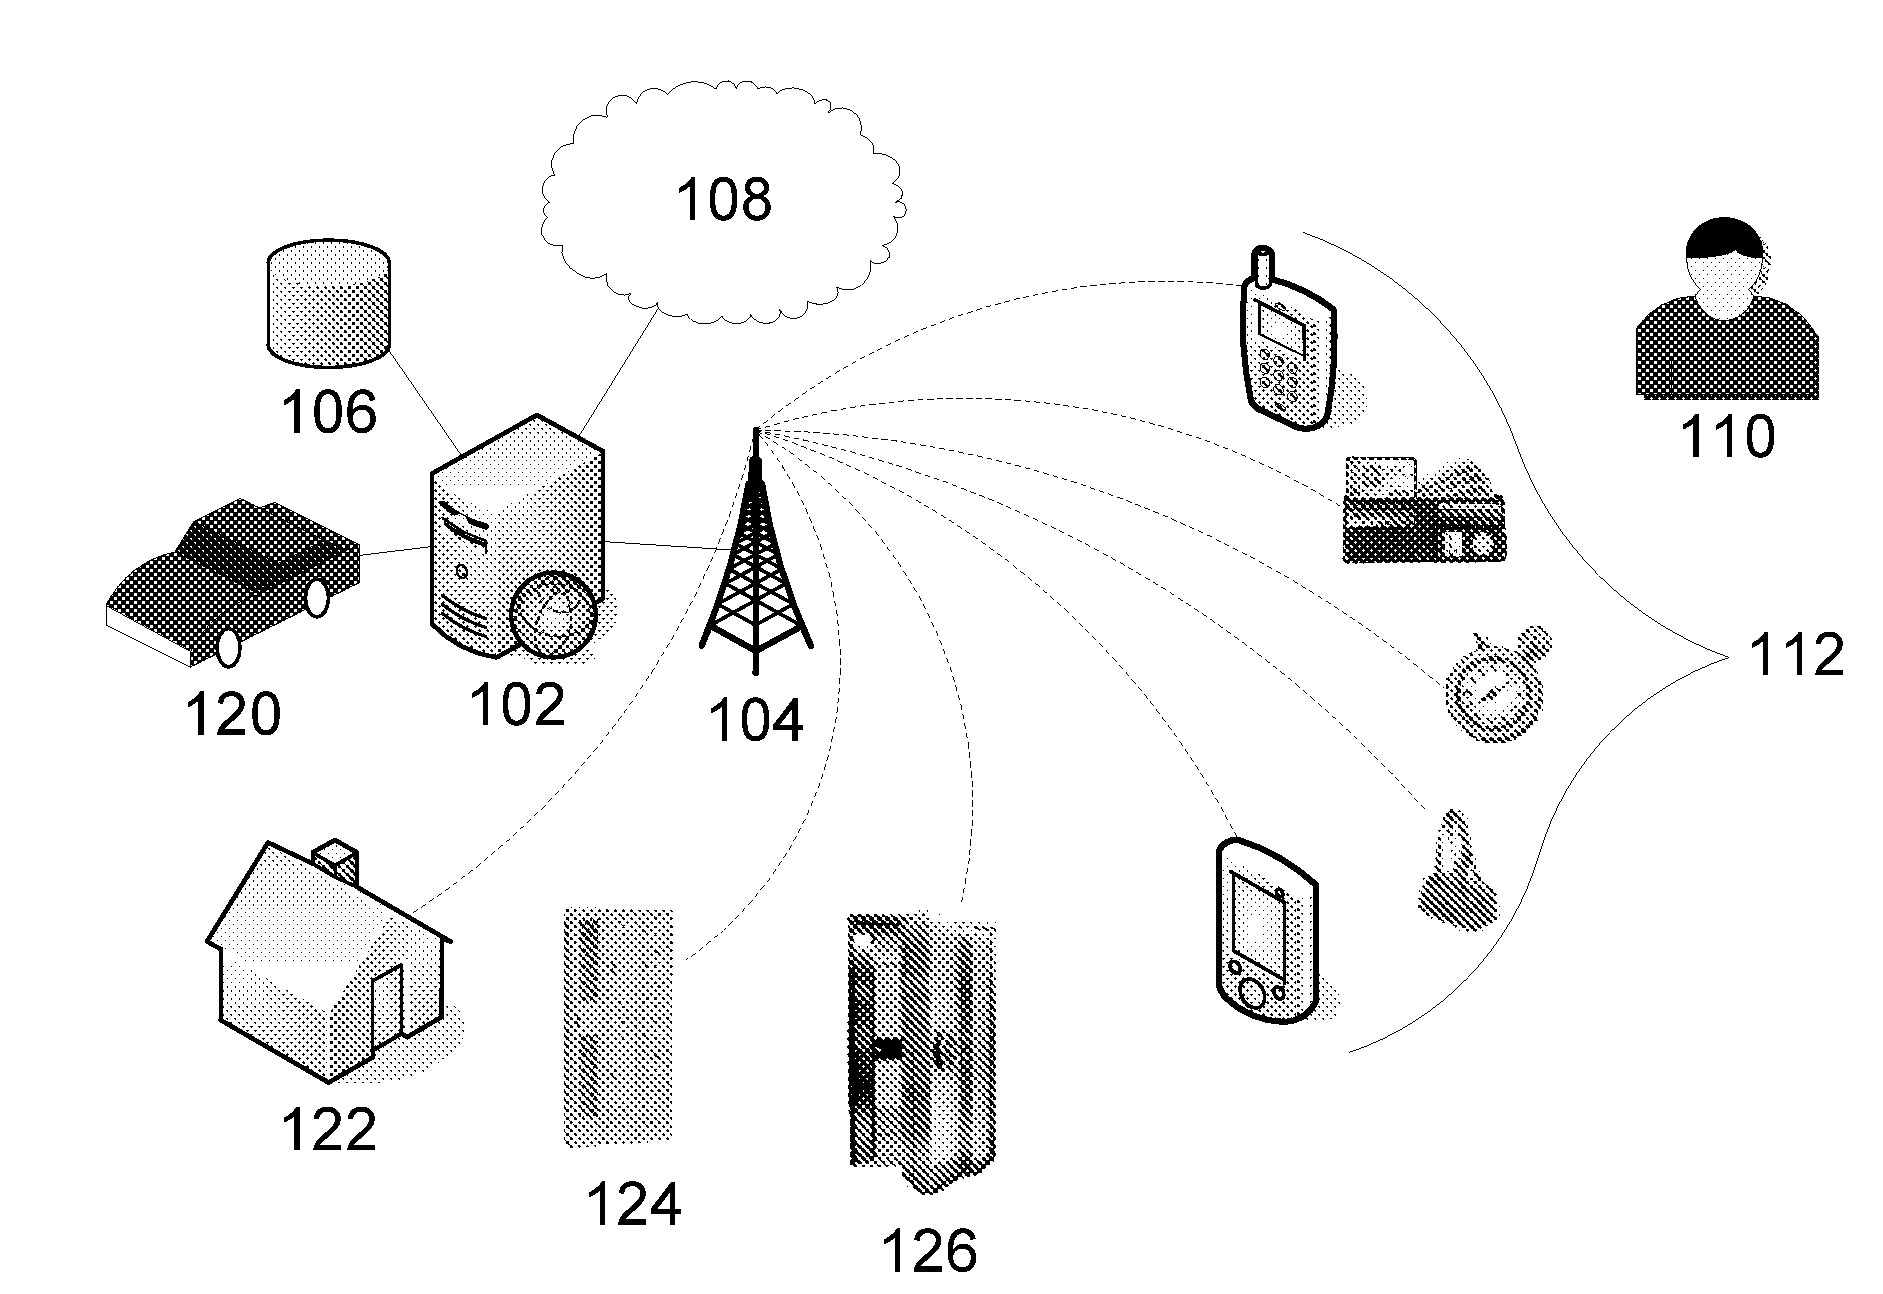 Systems and Methods for Determining Identity and Personal Assistance